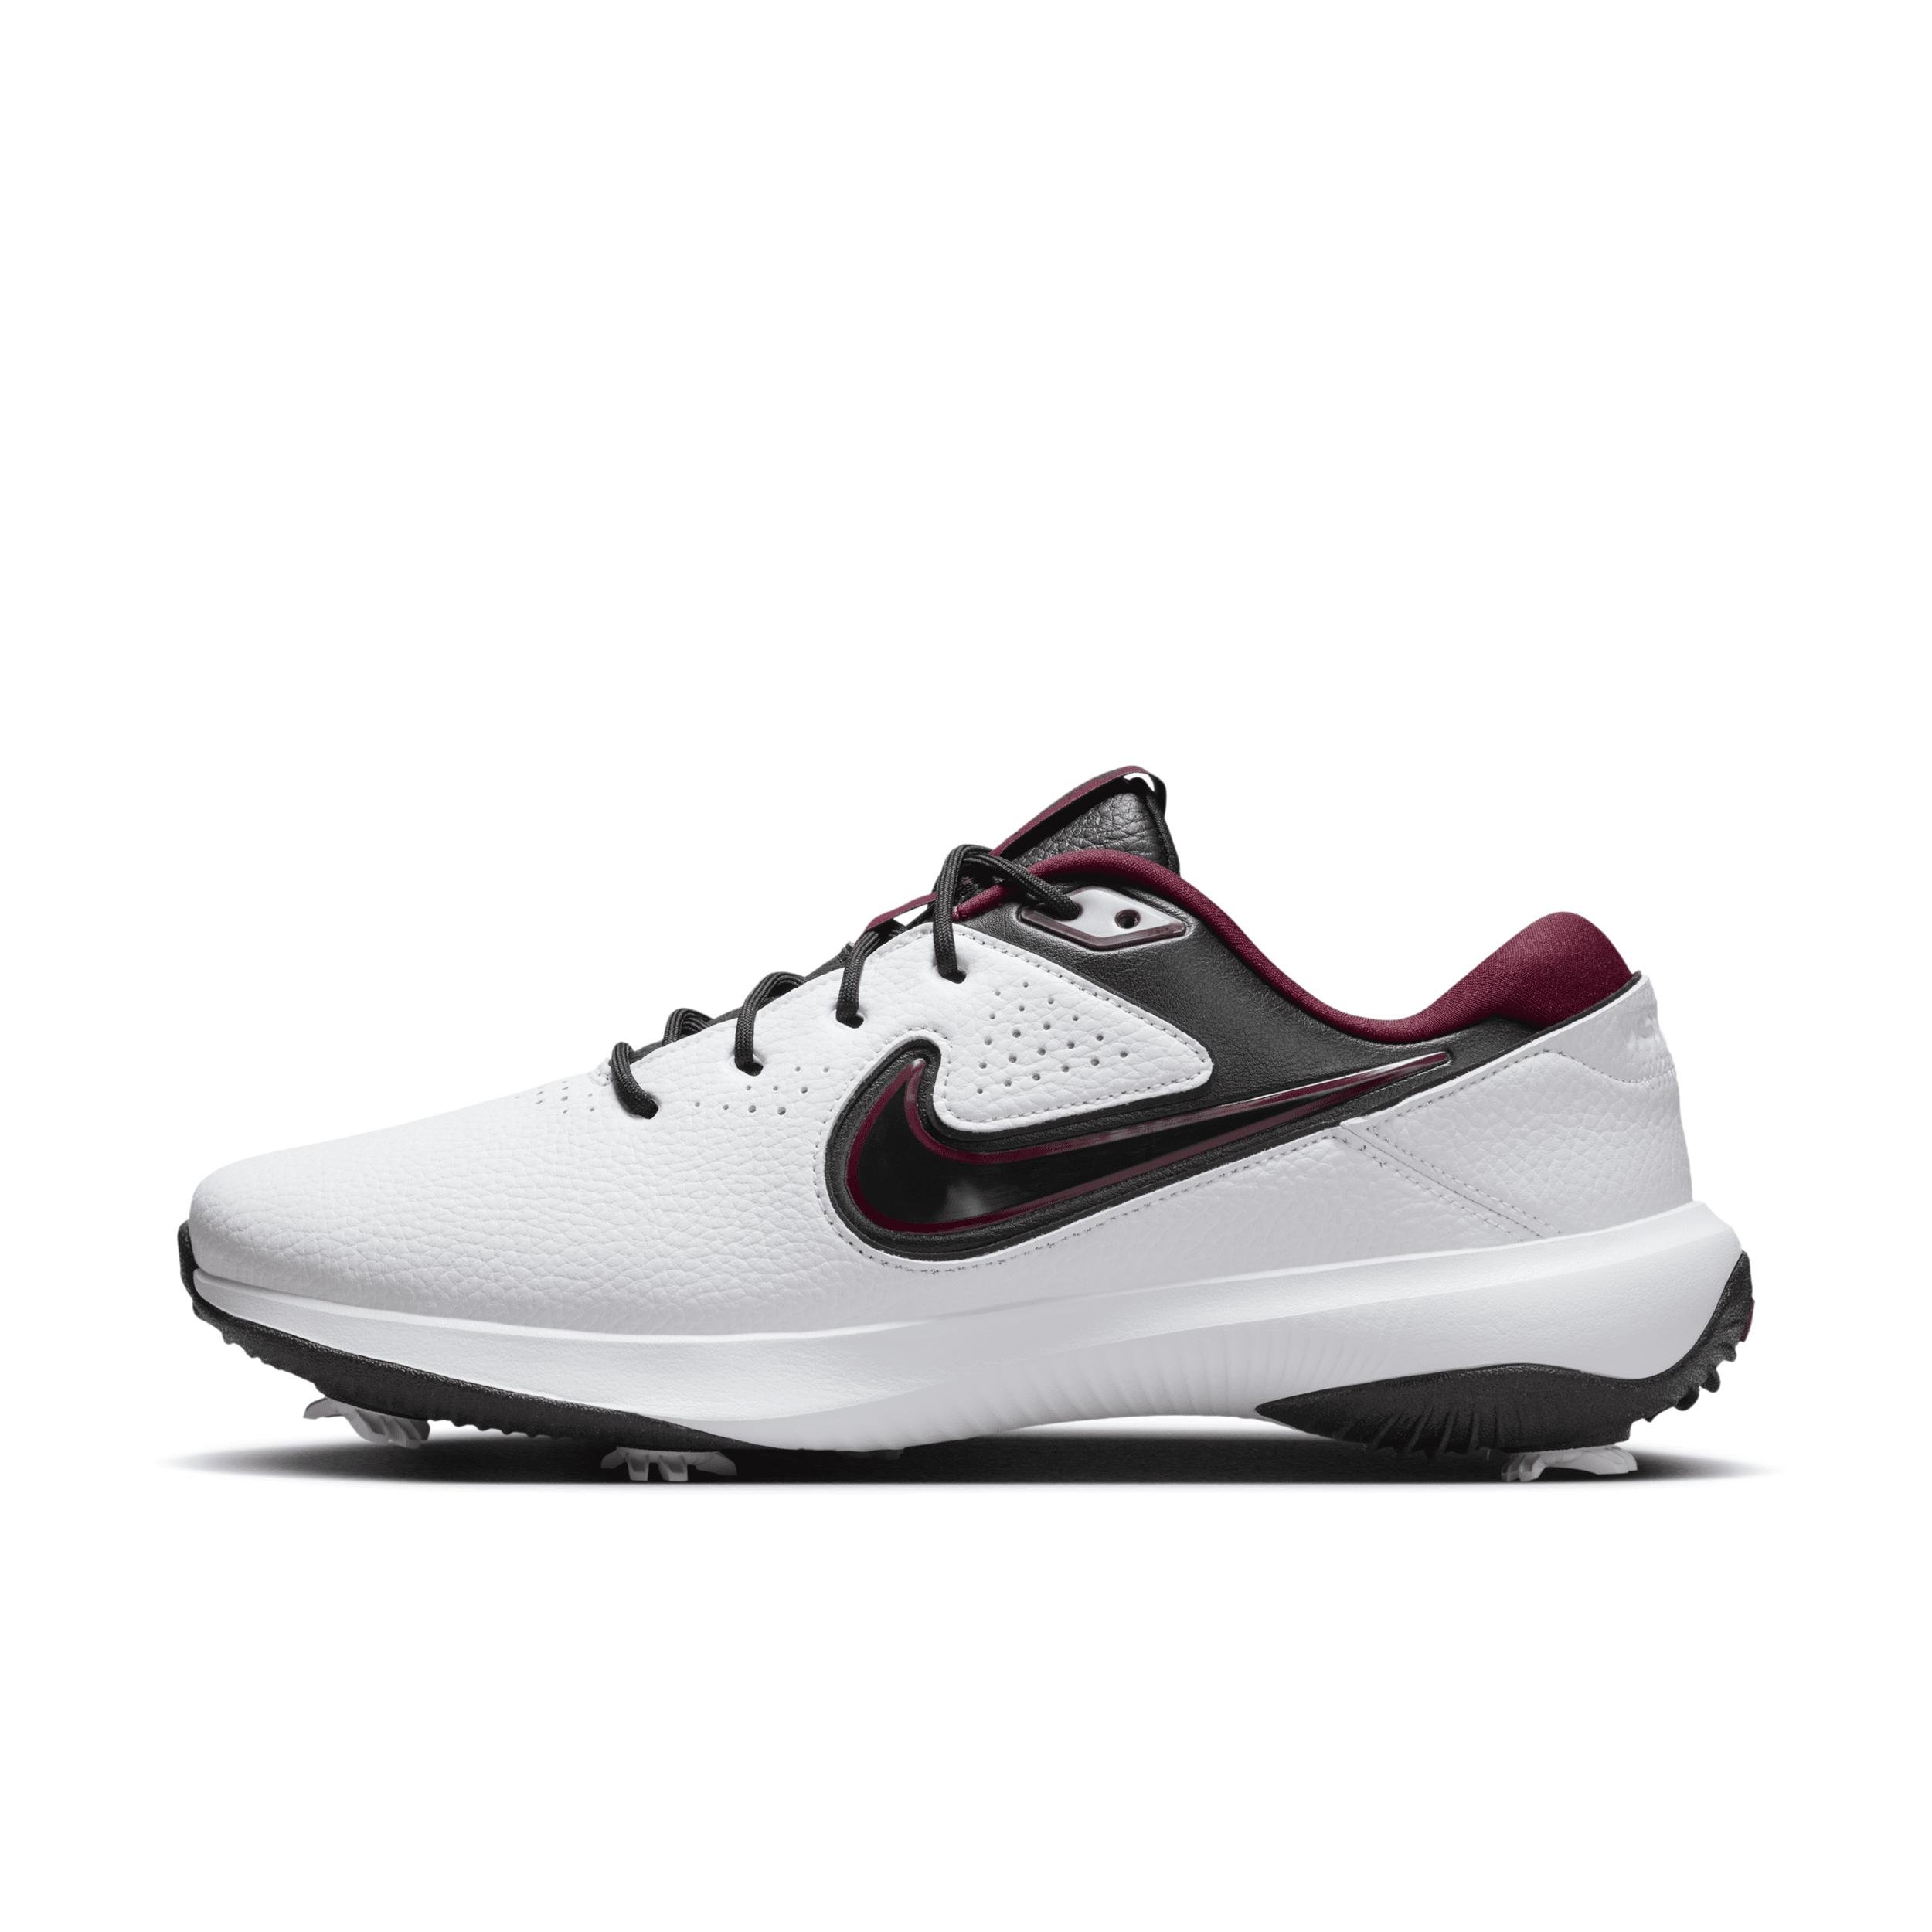 Nike Men's Victory Pro 3 Golf Shoes by NIKE